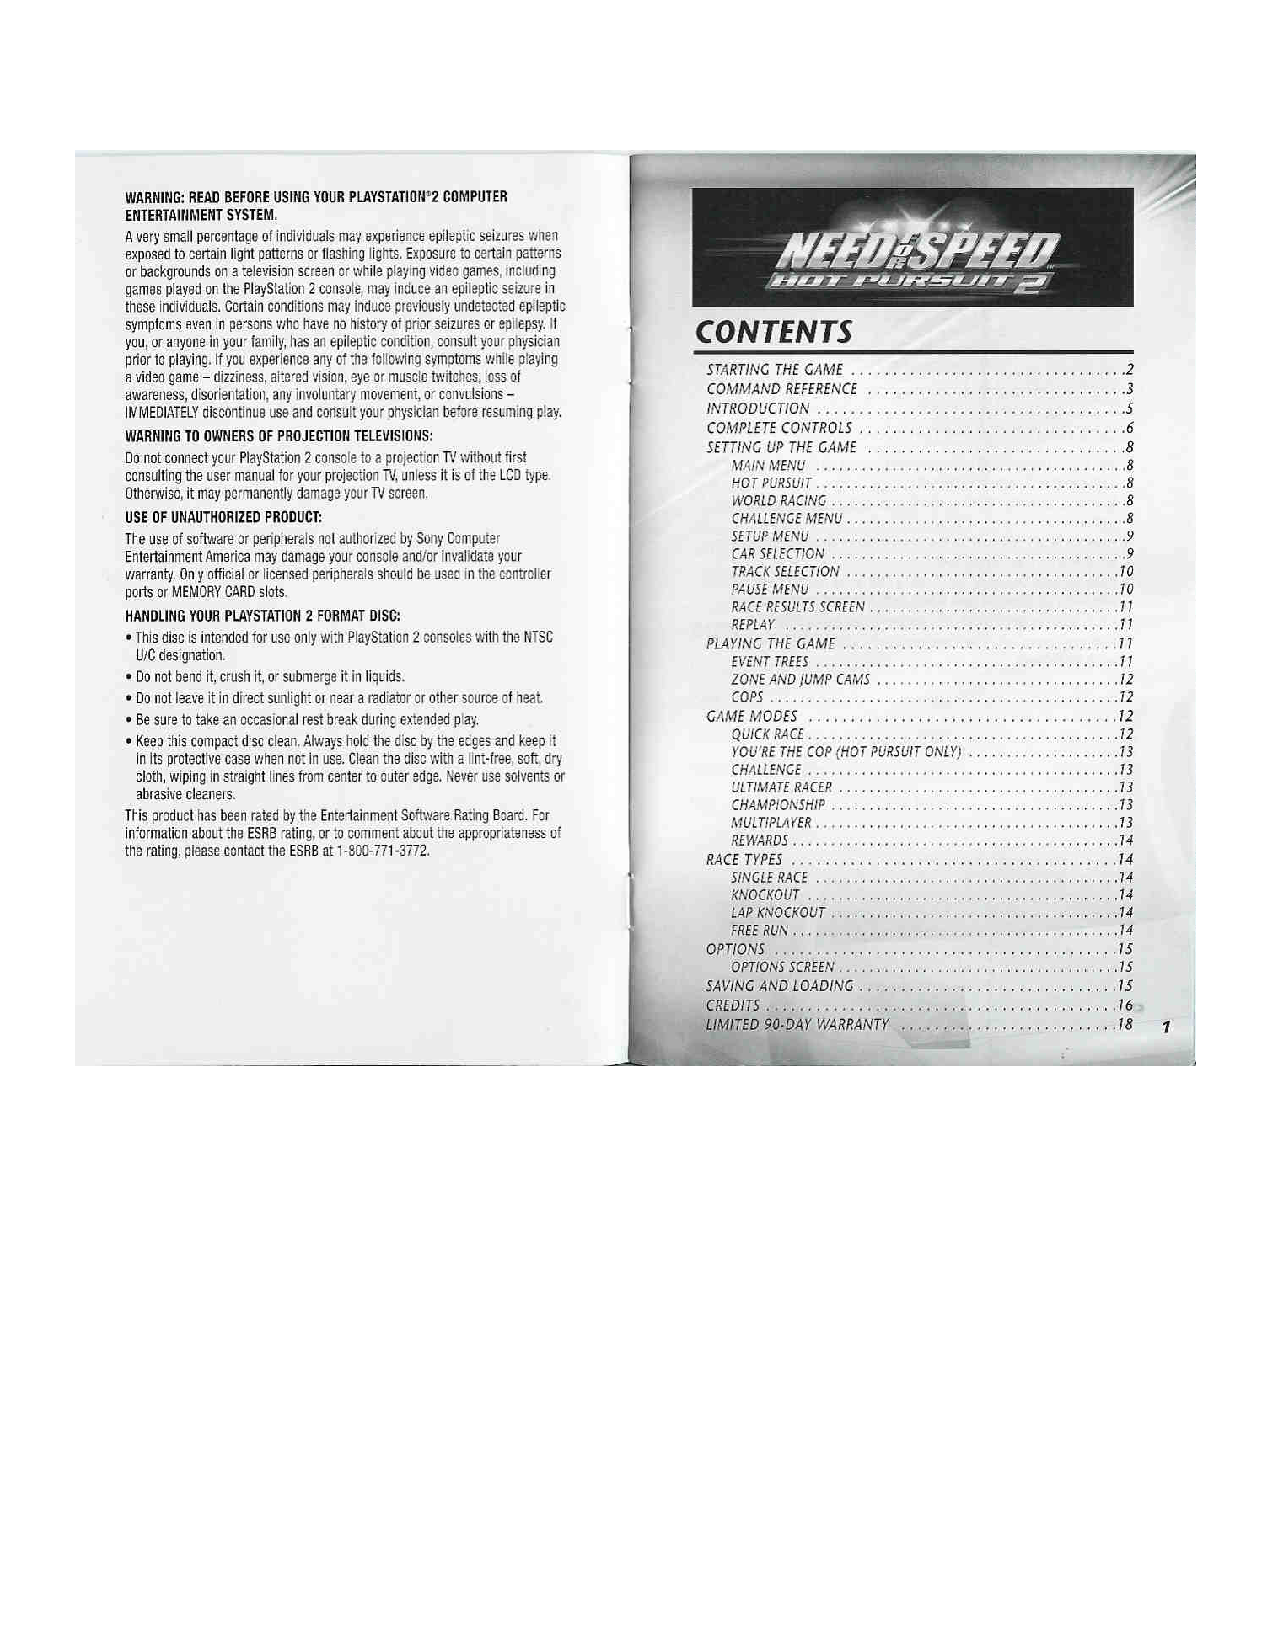 Games PS2 NEED FOR SPEED-HOT PURSUIT 2 User Manual